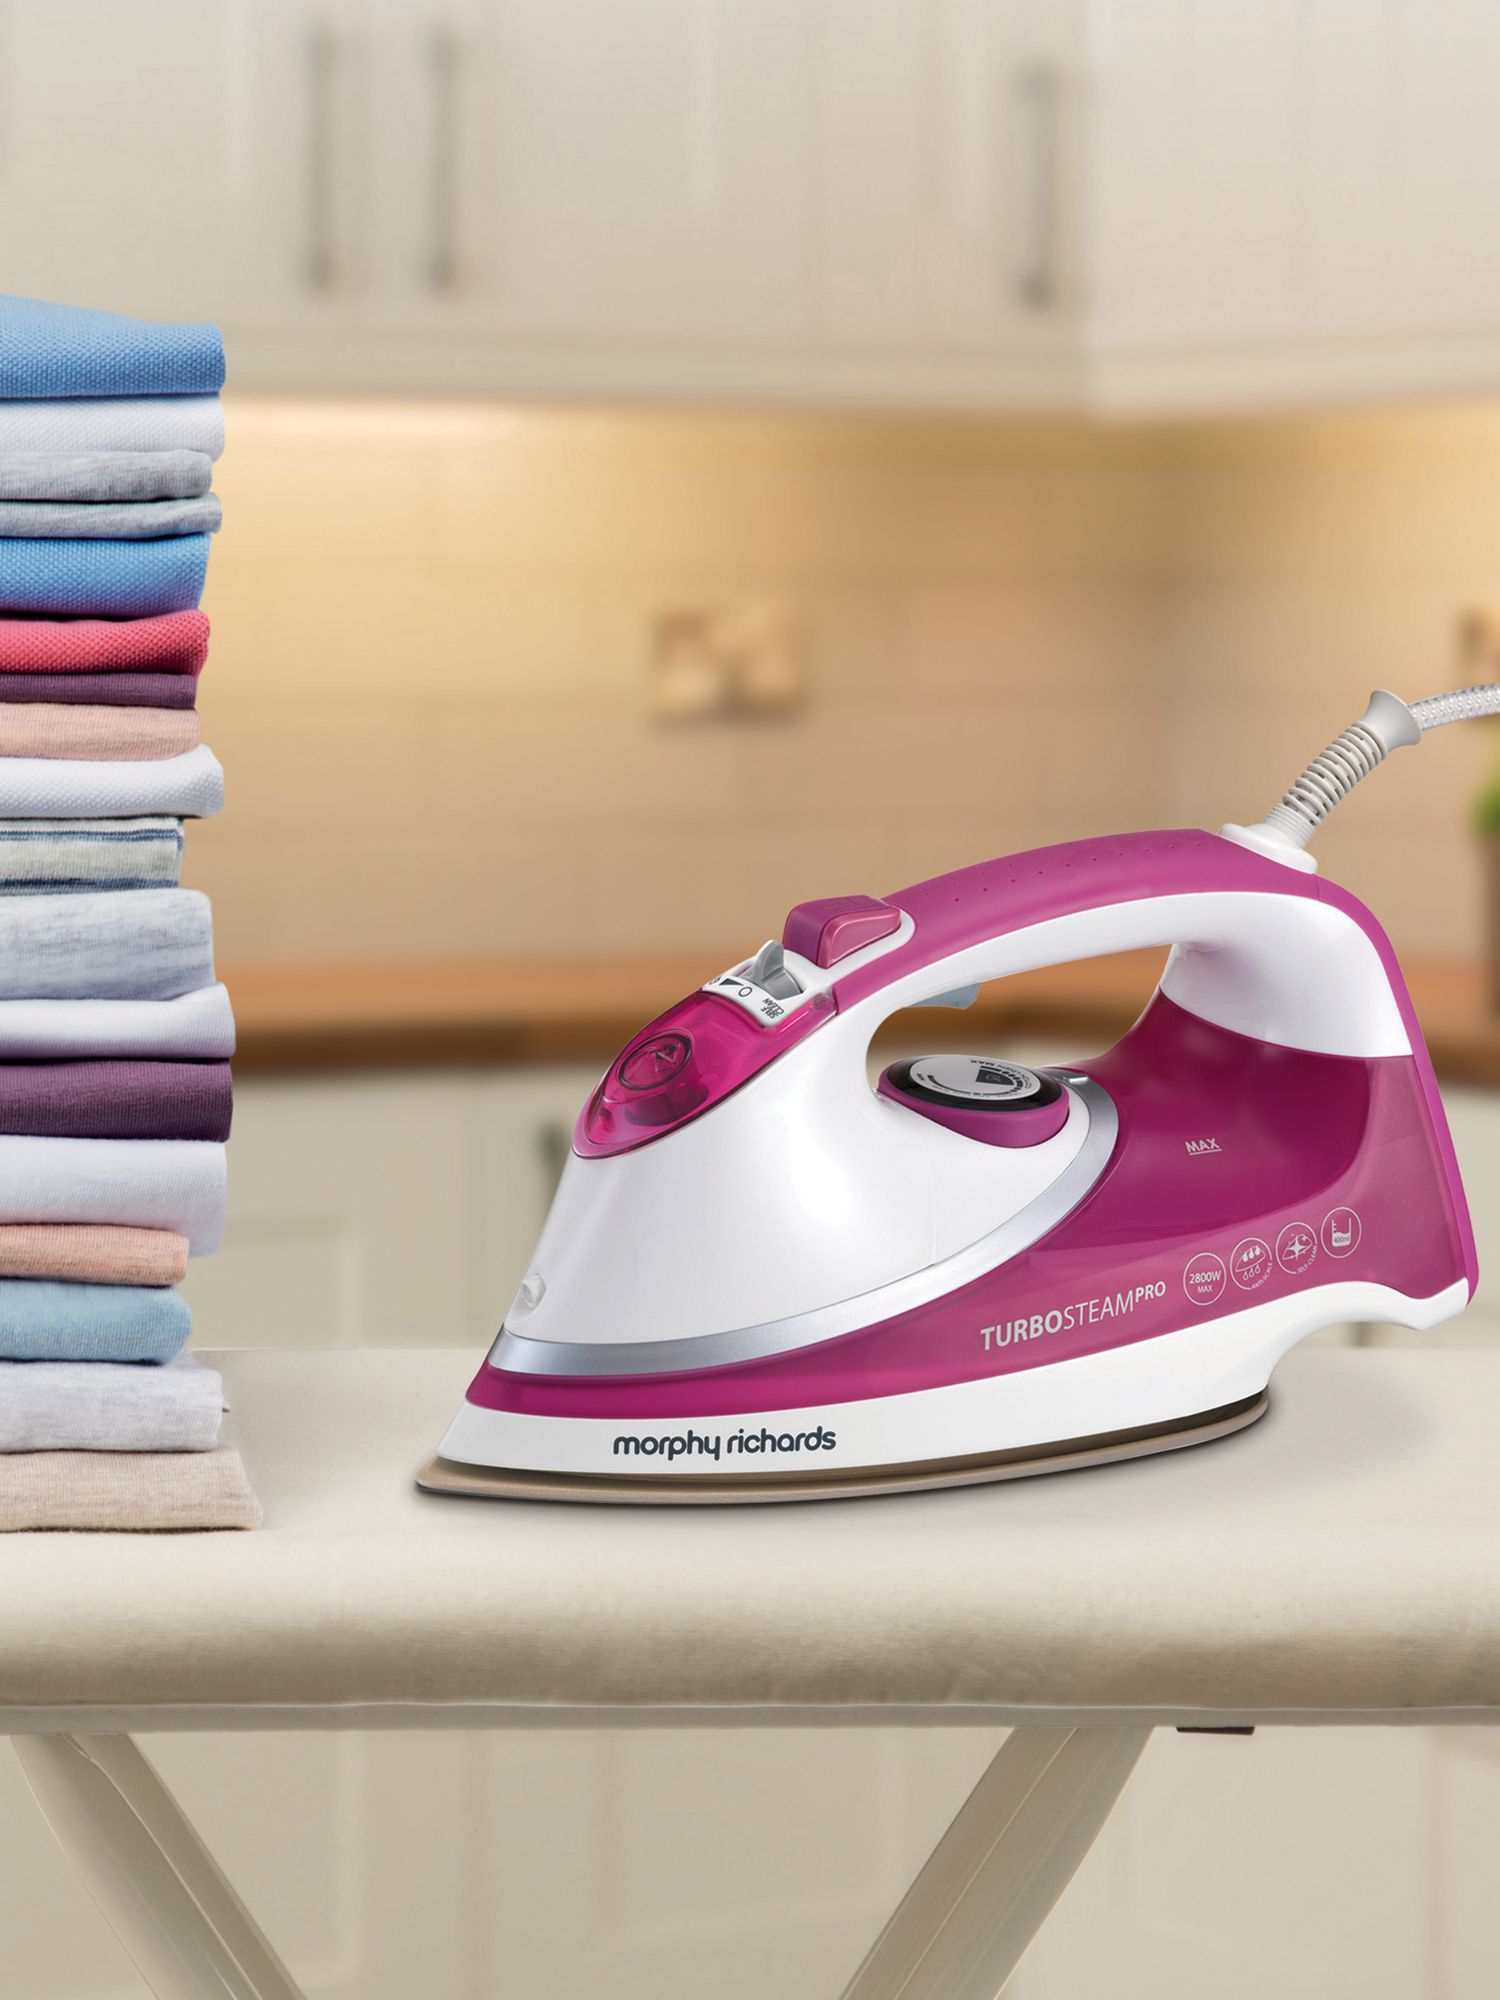 Morphy Richards Morphy Richards Turbosteam Pro Steam Iron Pearl Ceramic Soleplate 303123 